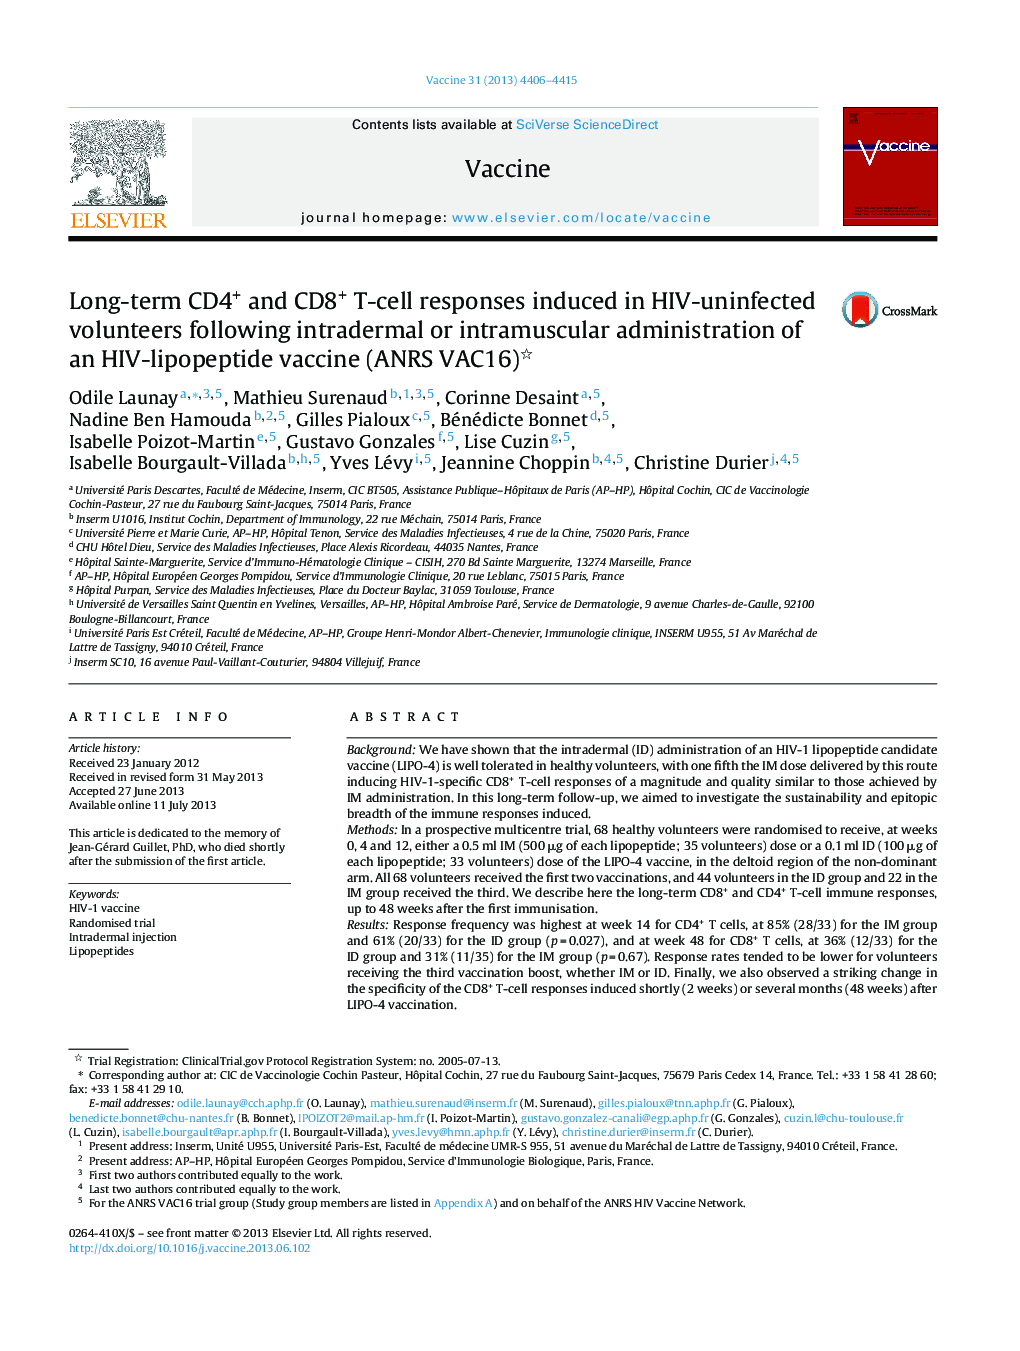 Long-term CD4+ and CD8+ T-cell responses induced in HIV-uninfected volunteers following intradermal or intramuscular administration of an HIV-lipopeptide vaccine (ANRS VAC16)